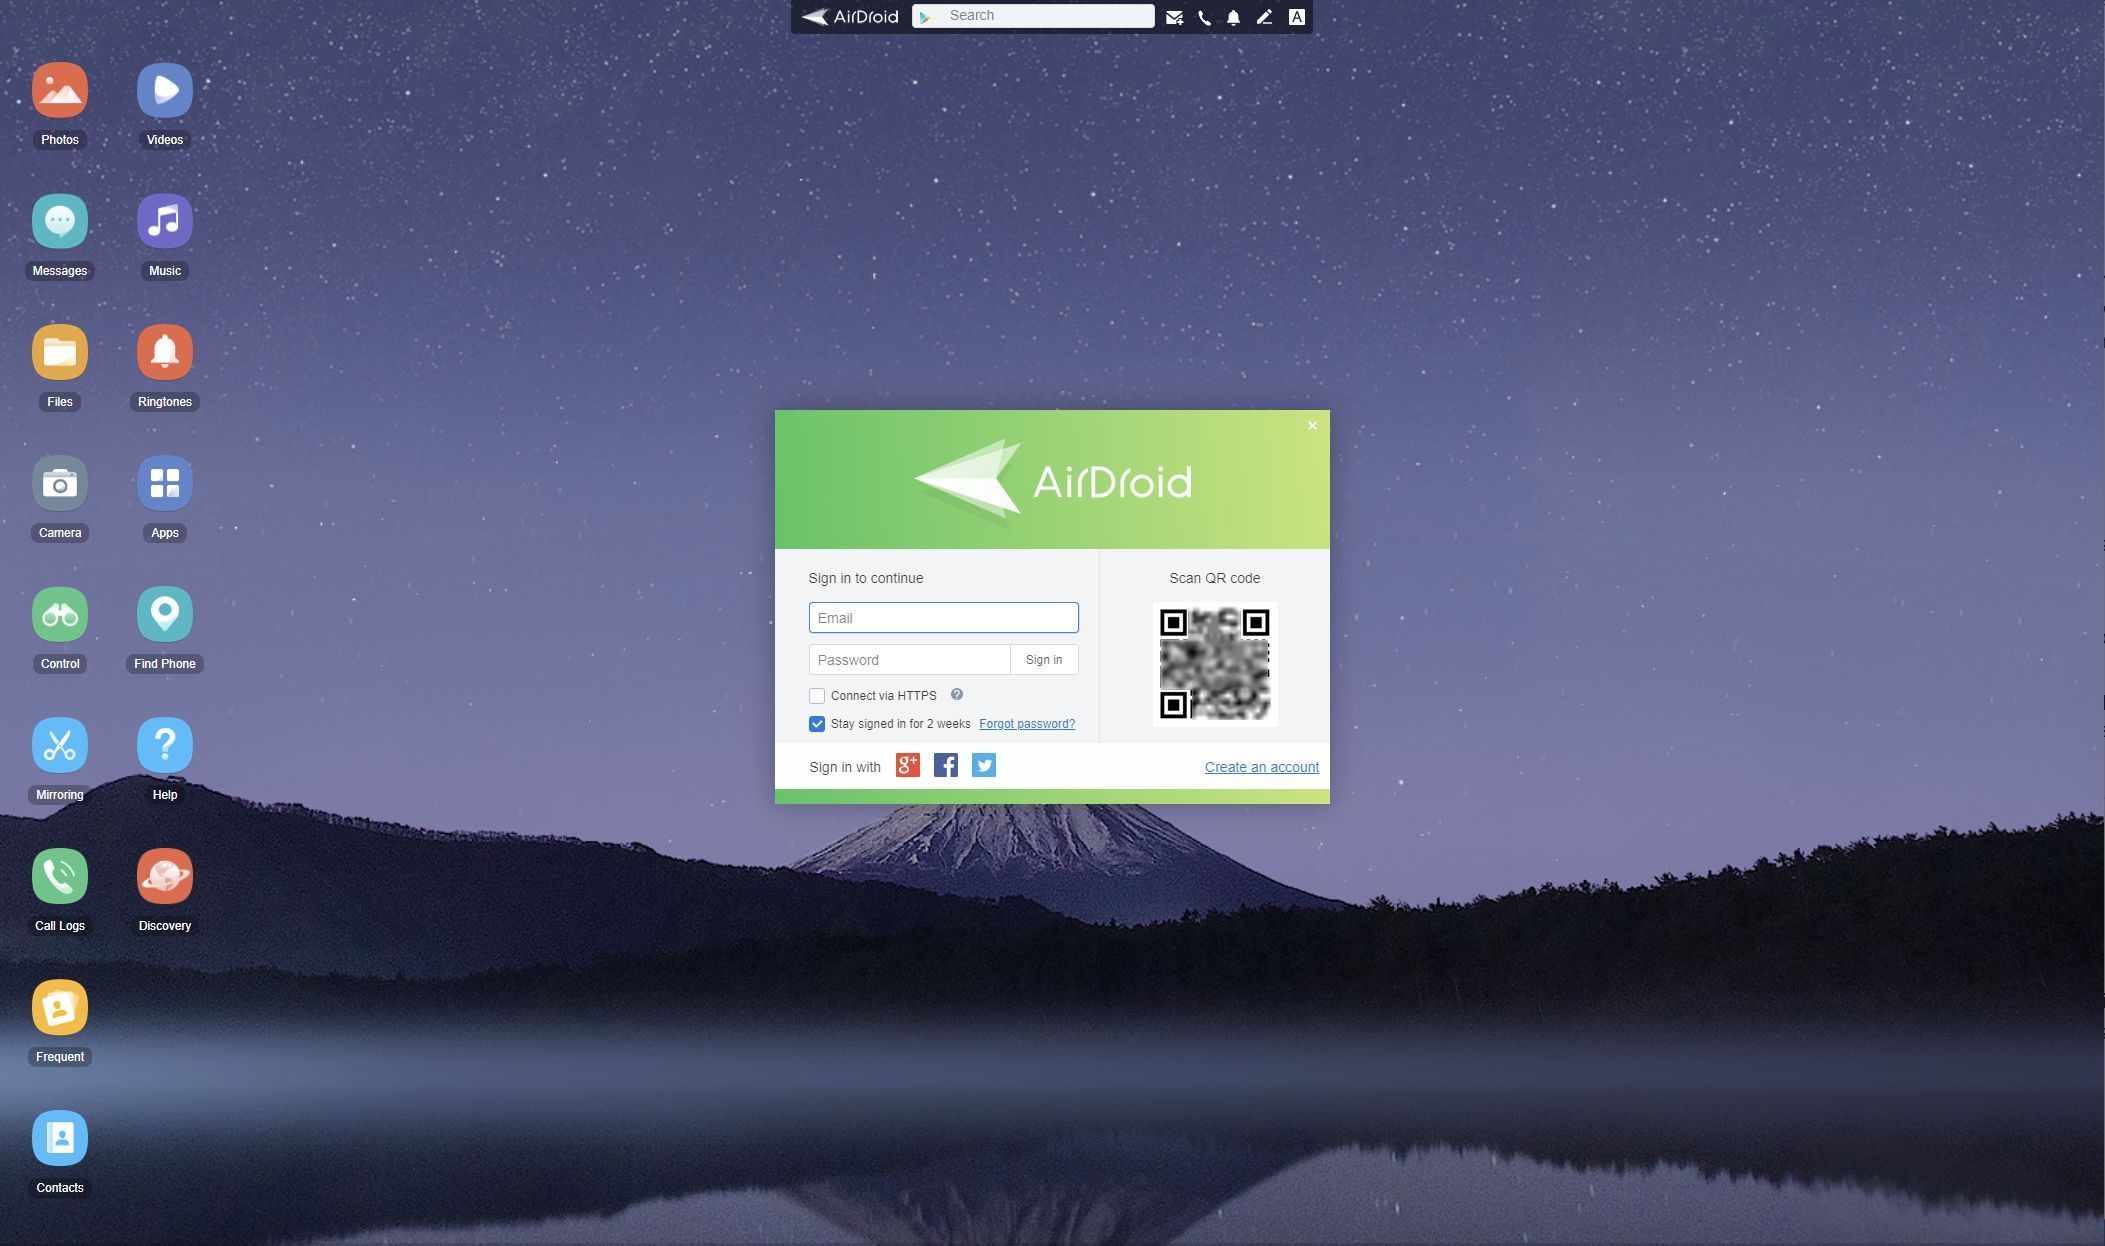 Screenshot of Scan QR code option in AirDroid